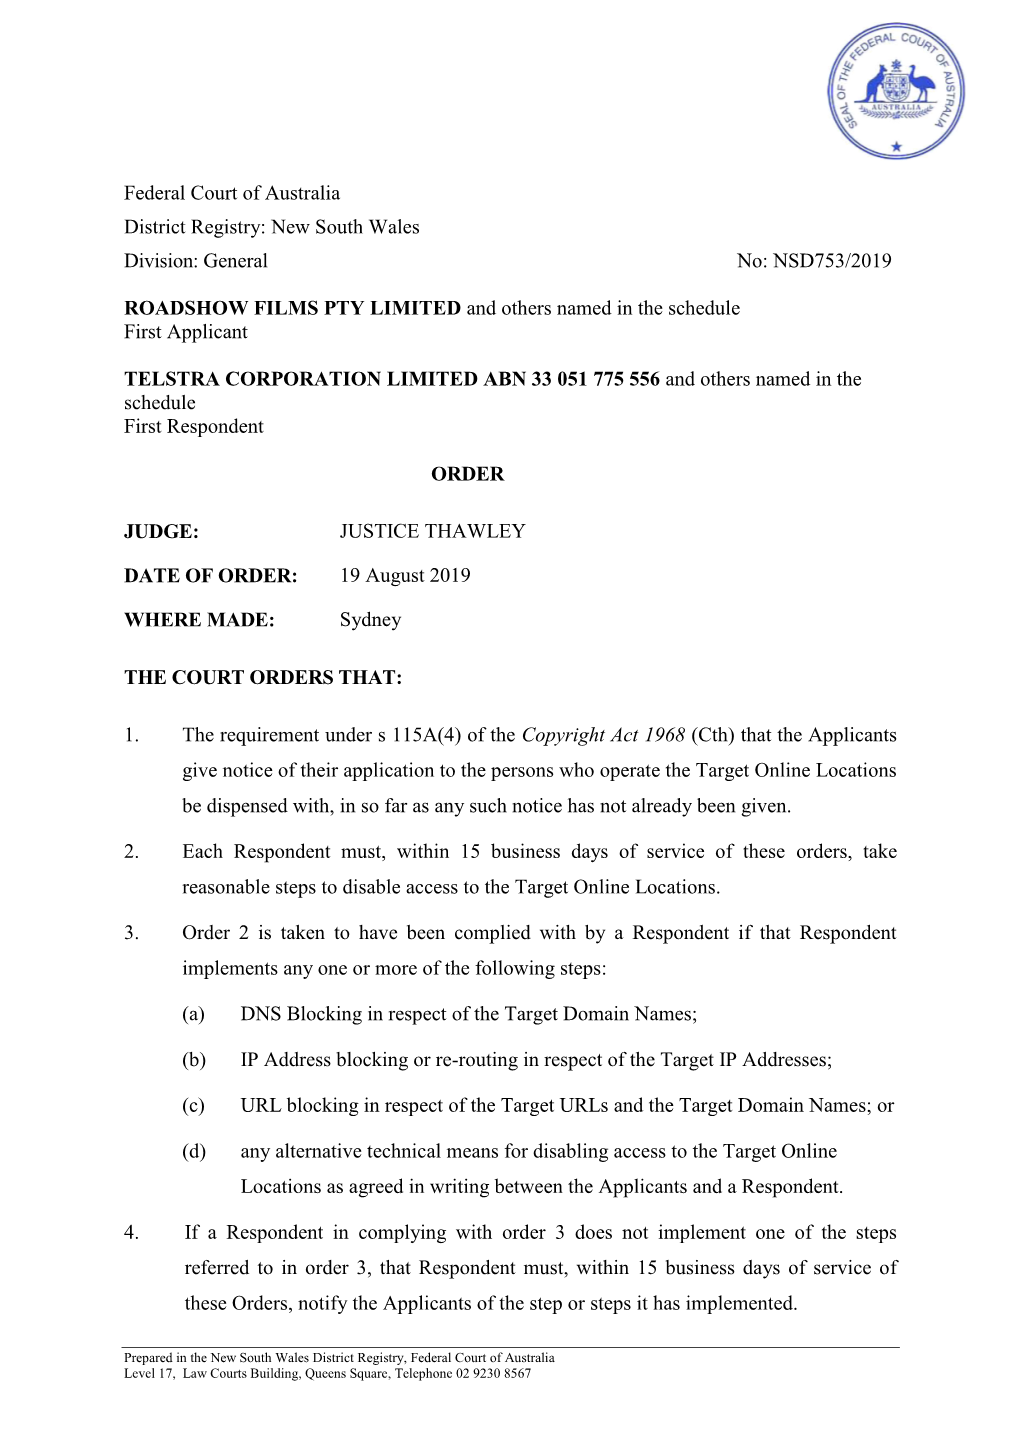 Federal Court of Australia District Registry: New South Wales Division: General No: NSD753/2019